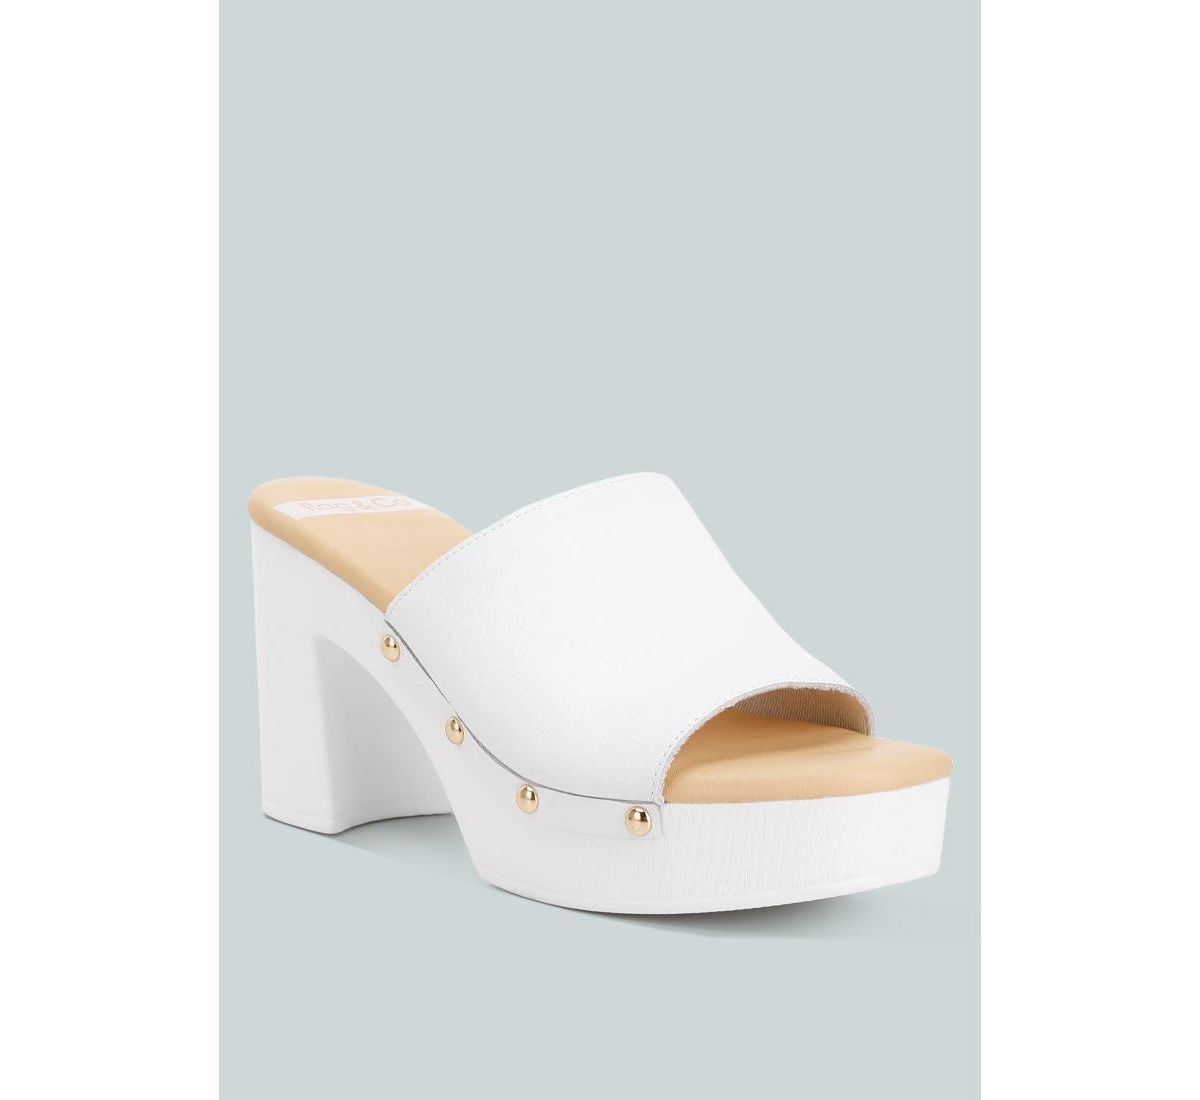 Drew Recycled Leather Block Heel Clogs In White - White